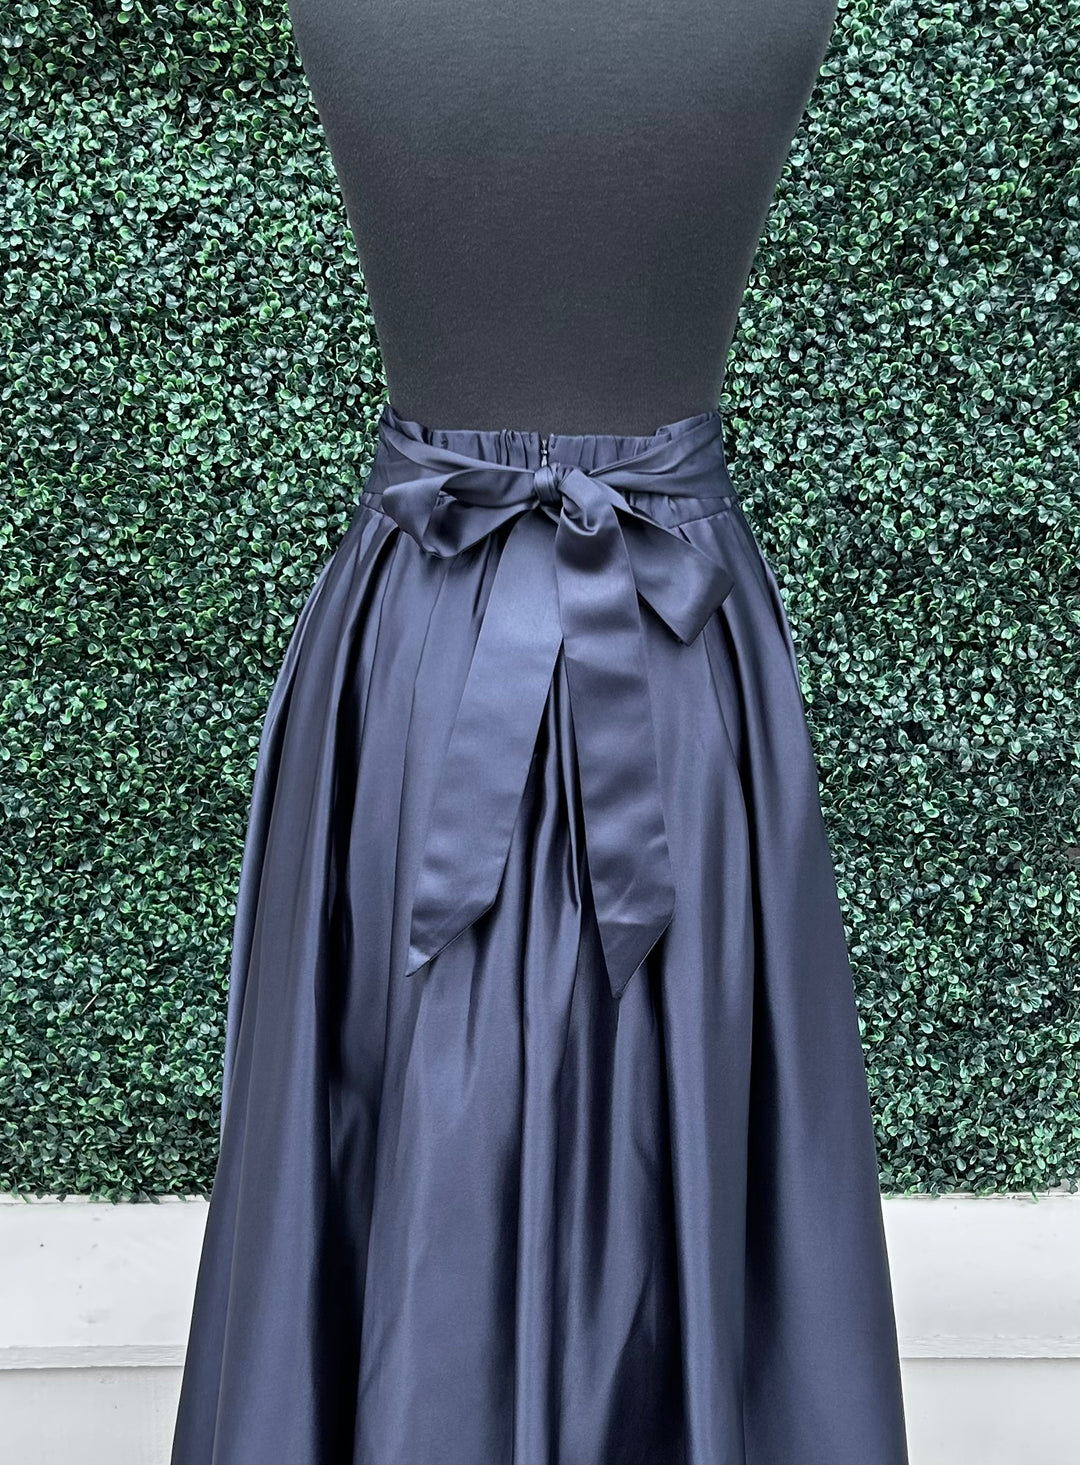 full skirt High Low Structured Skirt before you collection dress boutique houston navy